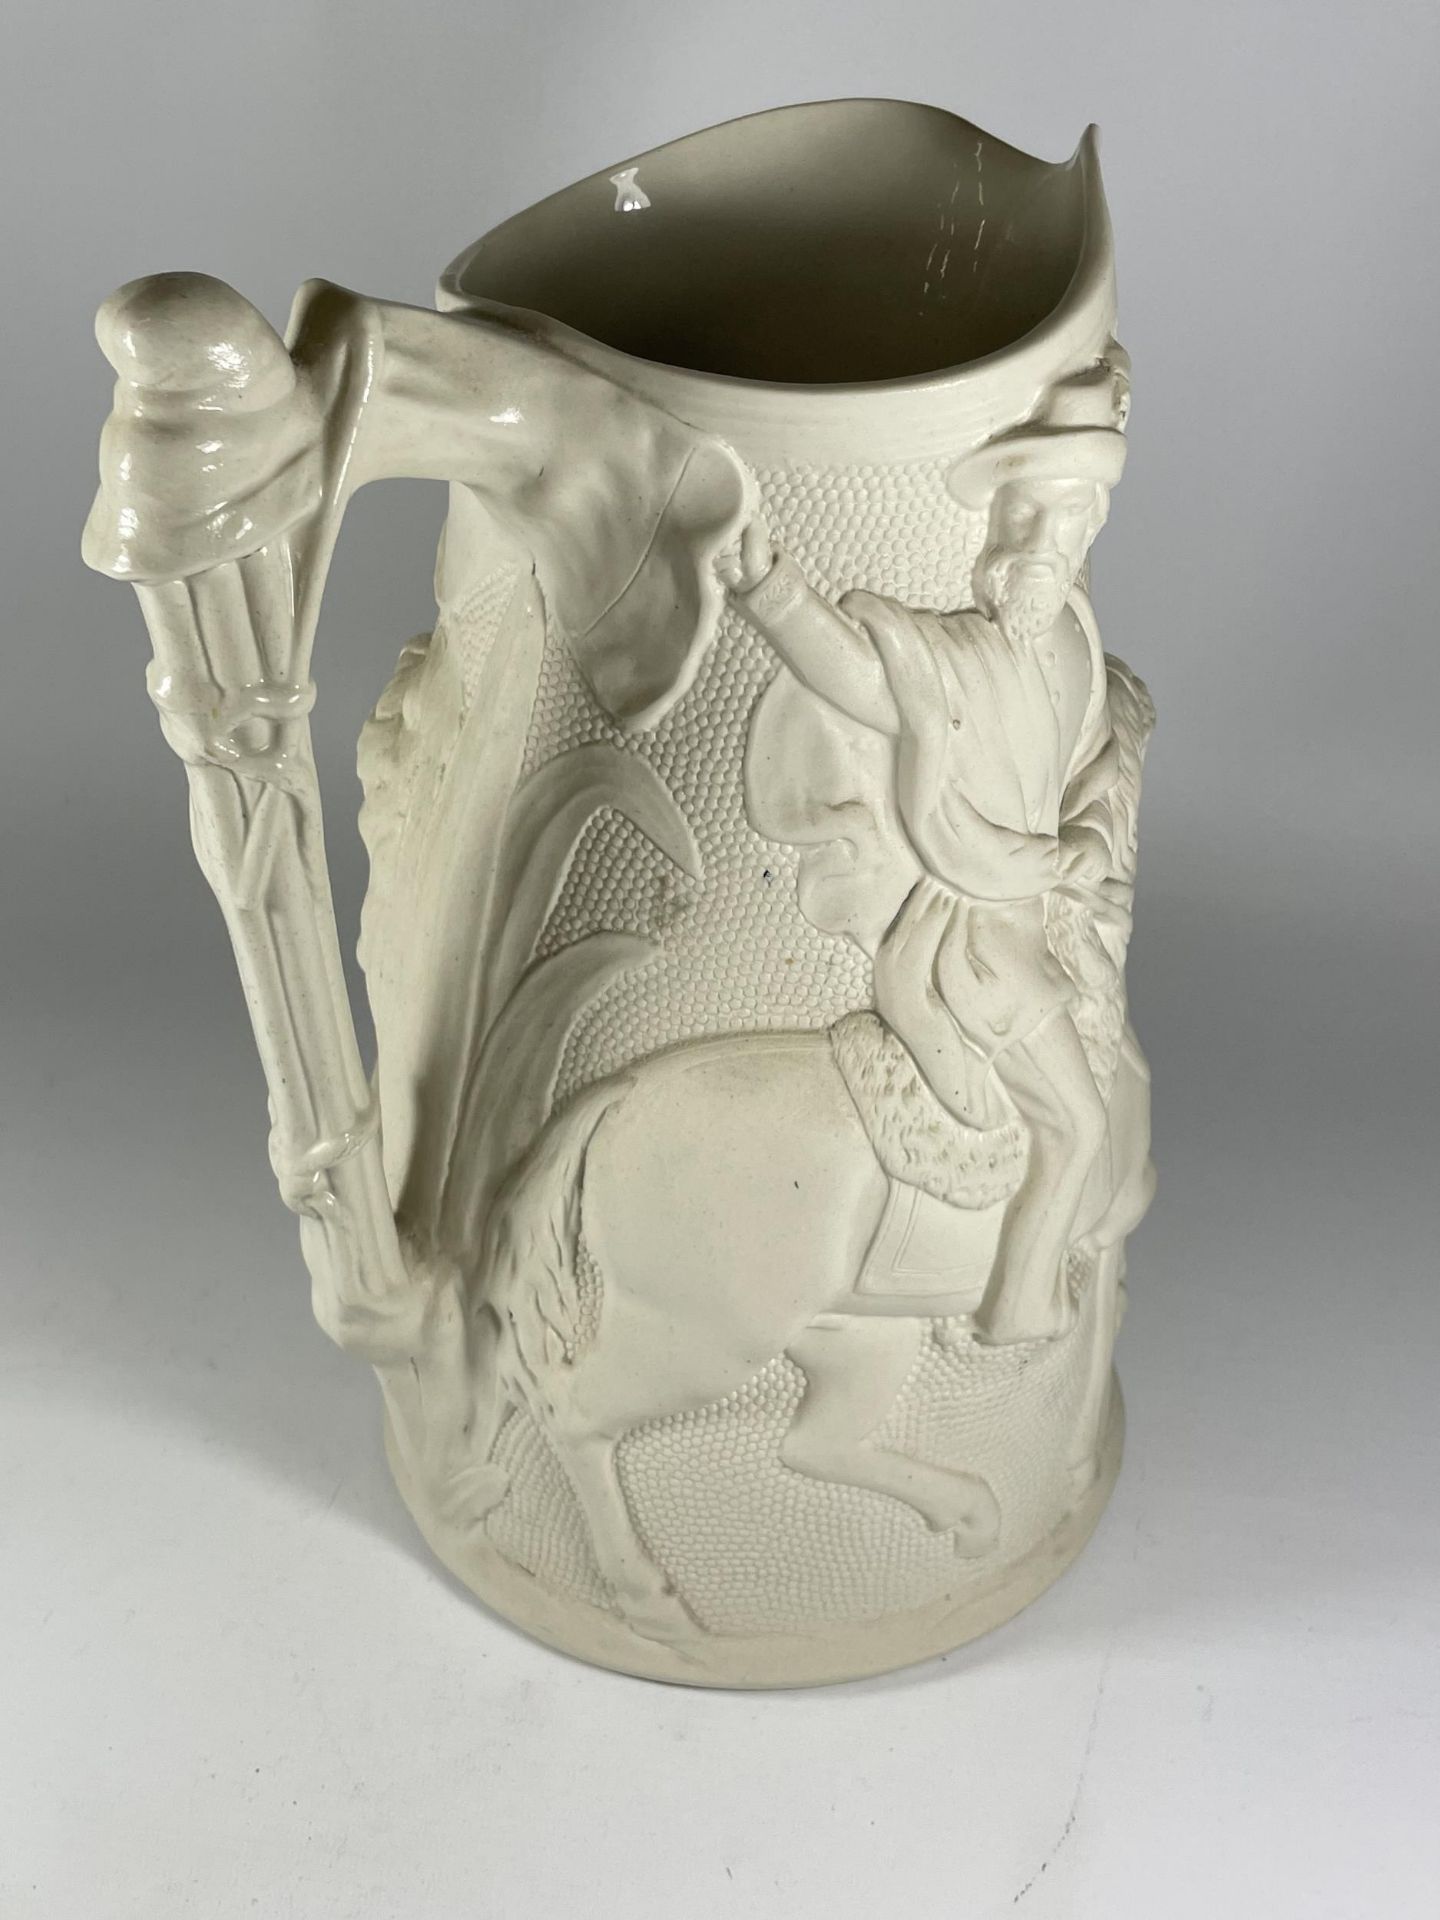 A LARGE PARIAN STYLE POTTERY JUG OF A MAN ON HORSEBACK, HEIGHT 31CM - Image 3 of 4